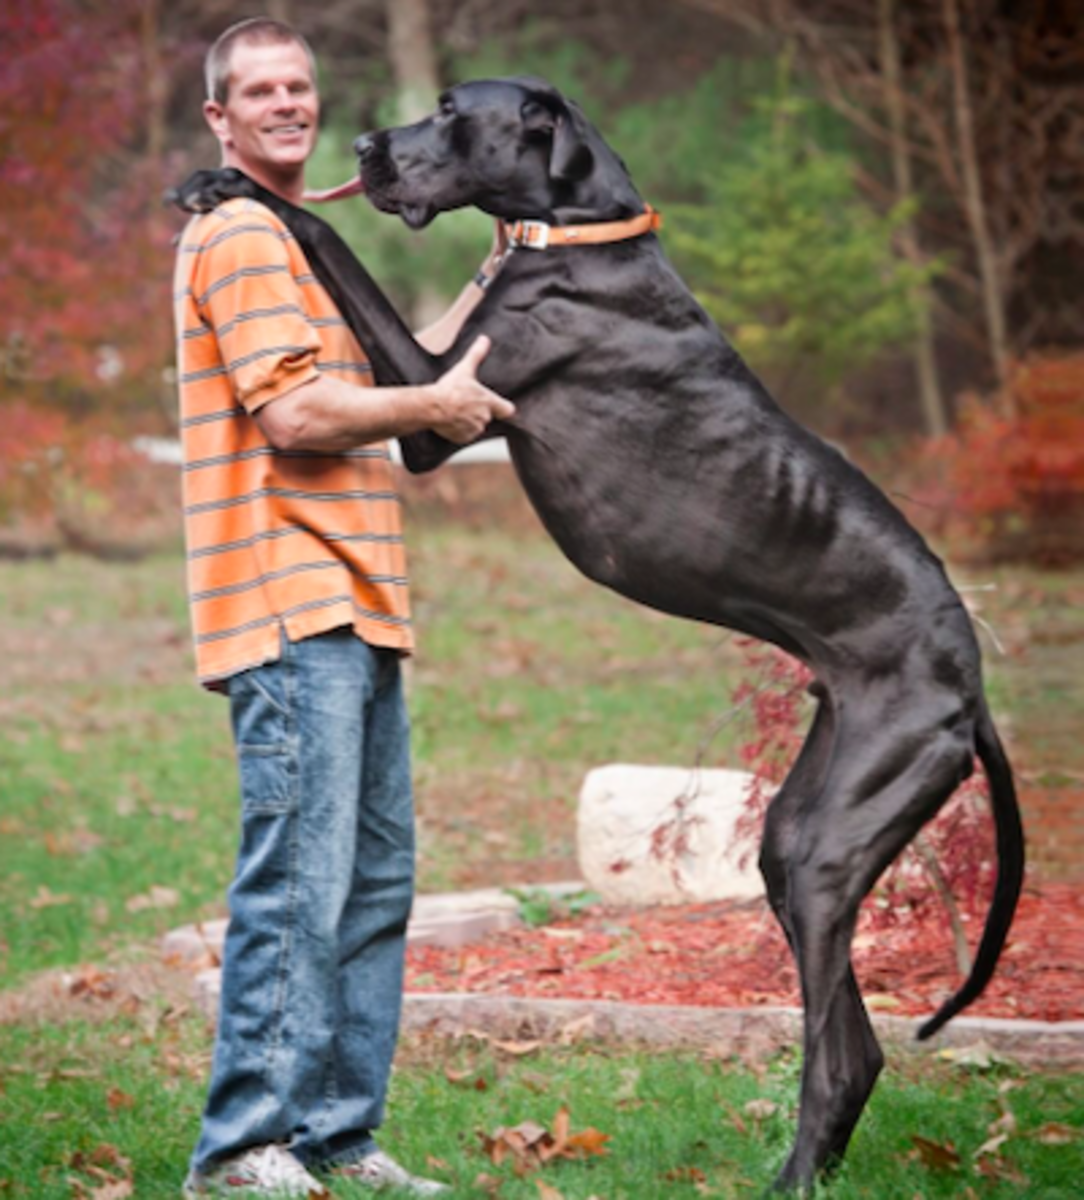 Florida Great Dane Named Atlas Might Be World's Tallest Living Dog ...